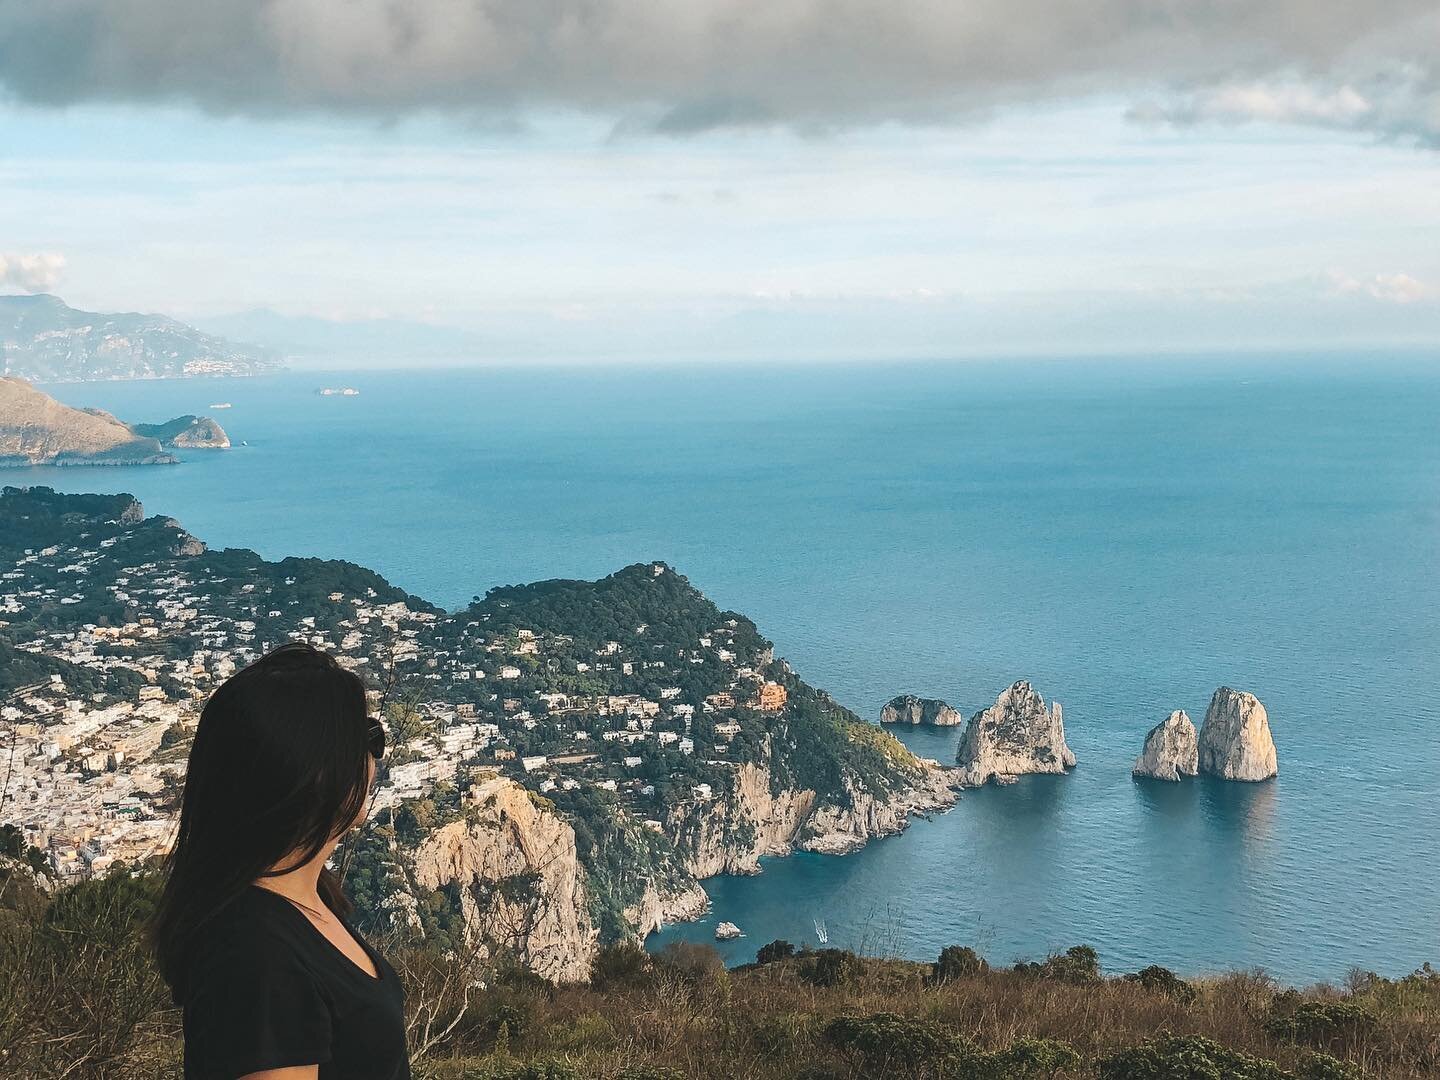 Hello 2021. Please be good to us. Wishing you all a happy and most importantly a healthy New Year!
*
*
*
*
*
#girlsfrombehind #visitcapri #darlingescapes #damestravel #femmetravel #capriisland #wearethetravelgirls #destination_italy #amazingplaces #a